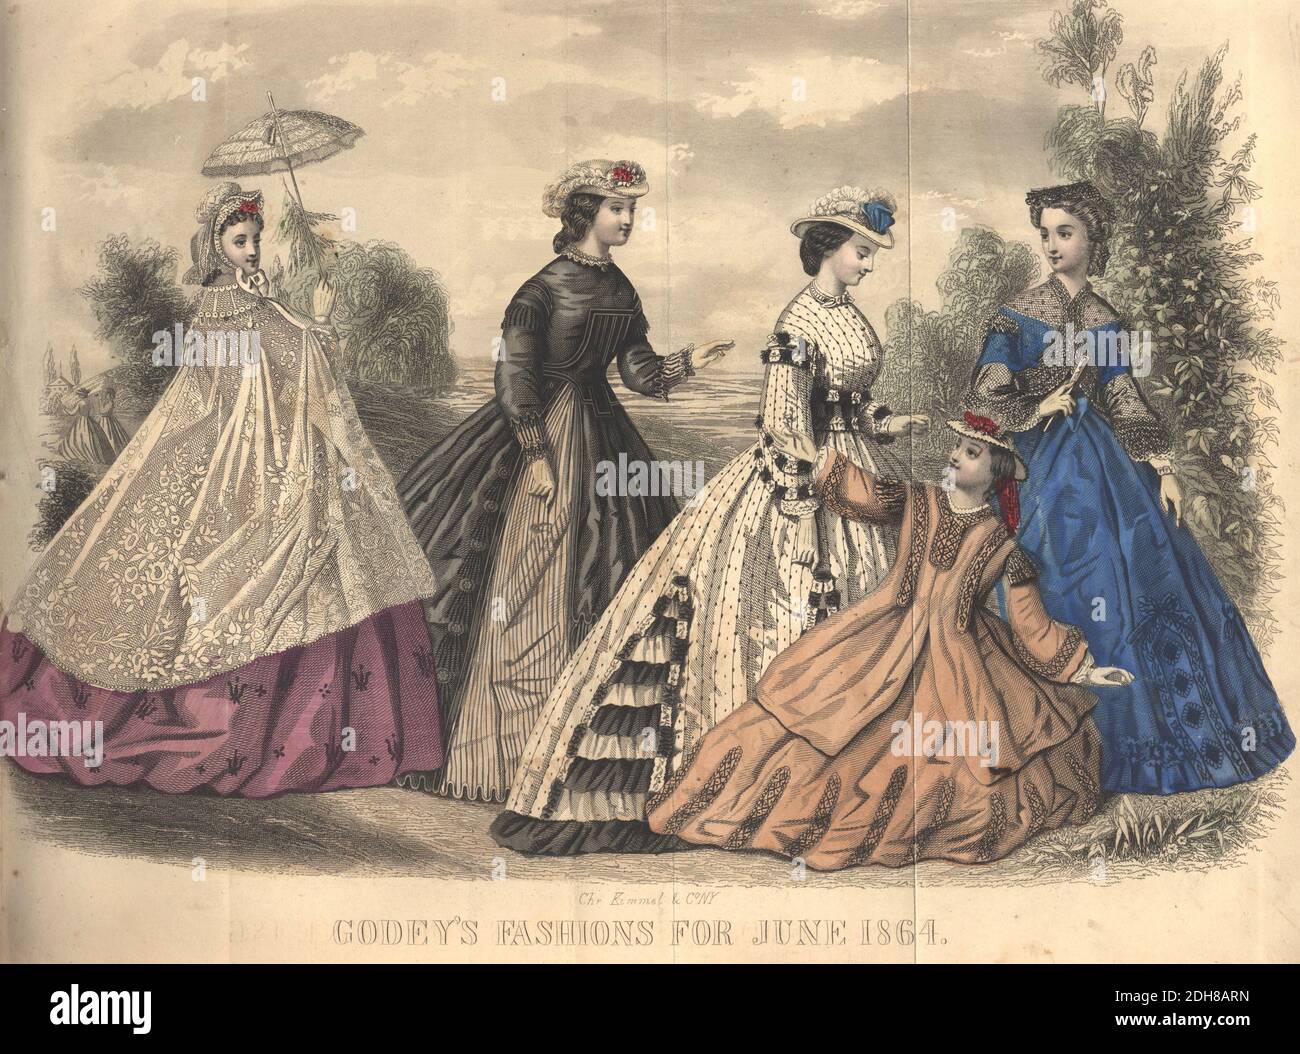 Colour drawing of Godey's women's Fashion for June from Godey's Lady's Book and Magazine, 1864 Philadelphia, Louis A. Godey, Sarah Josepha Hale, Stock Photo